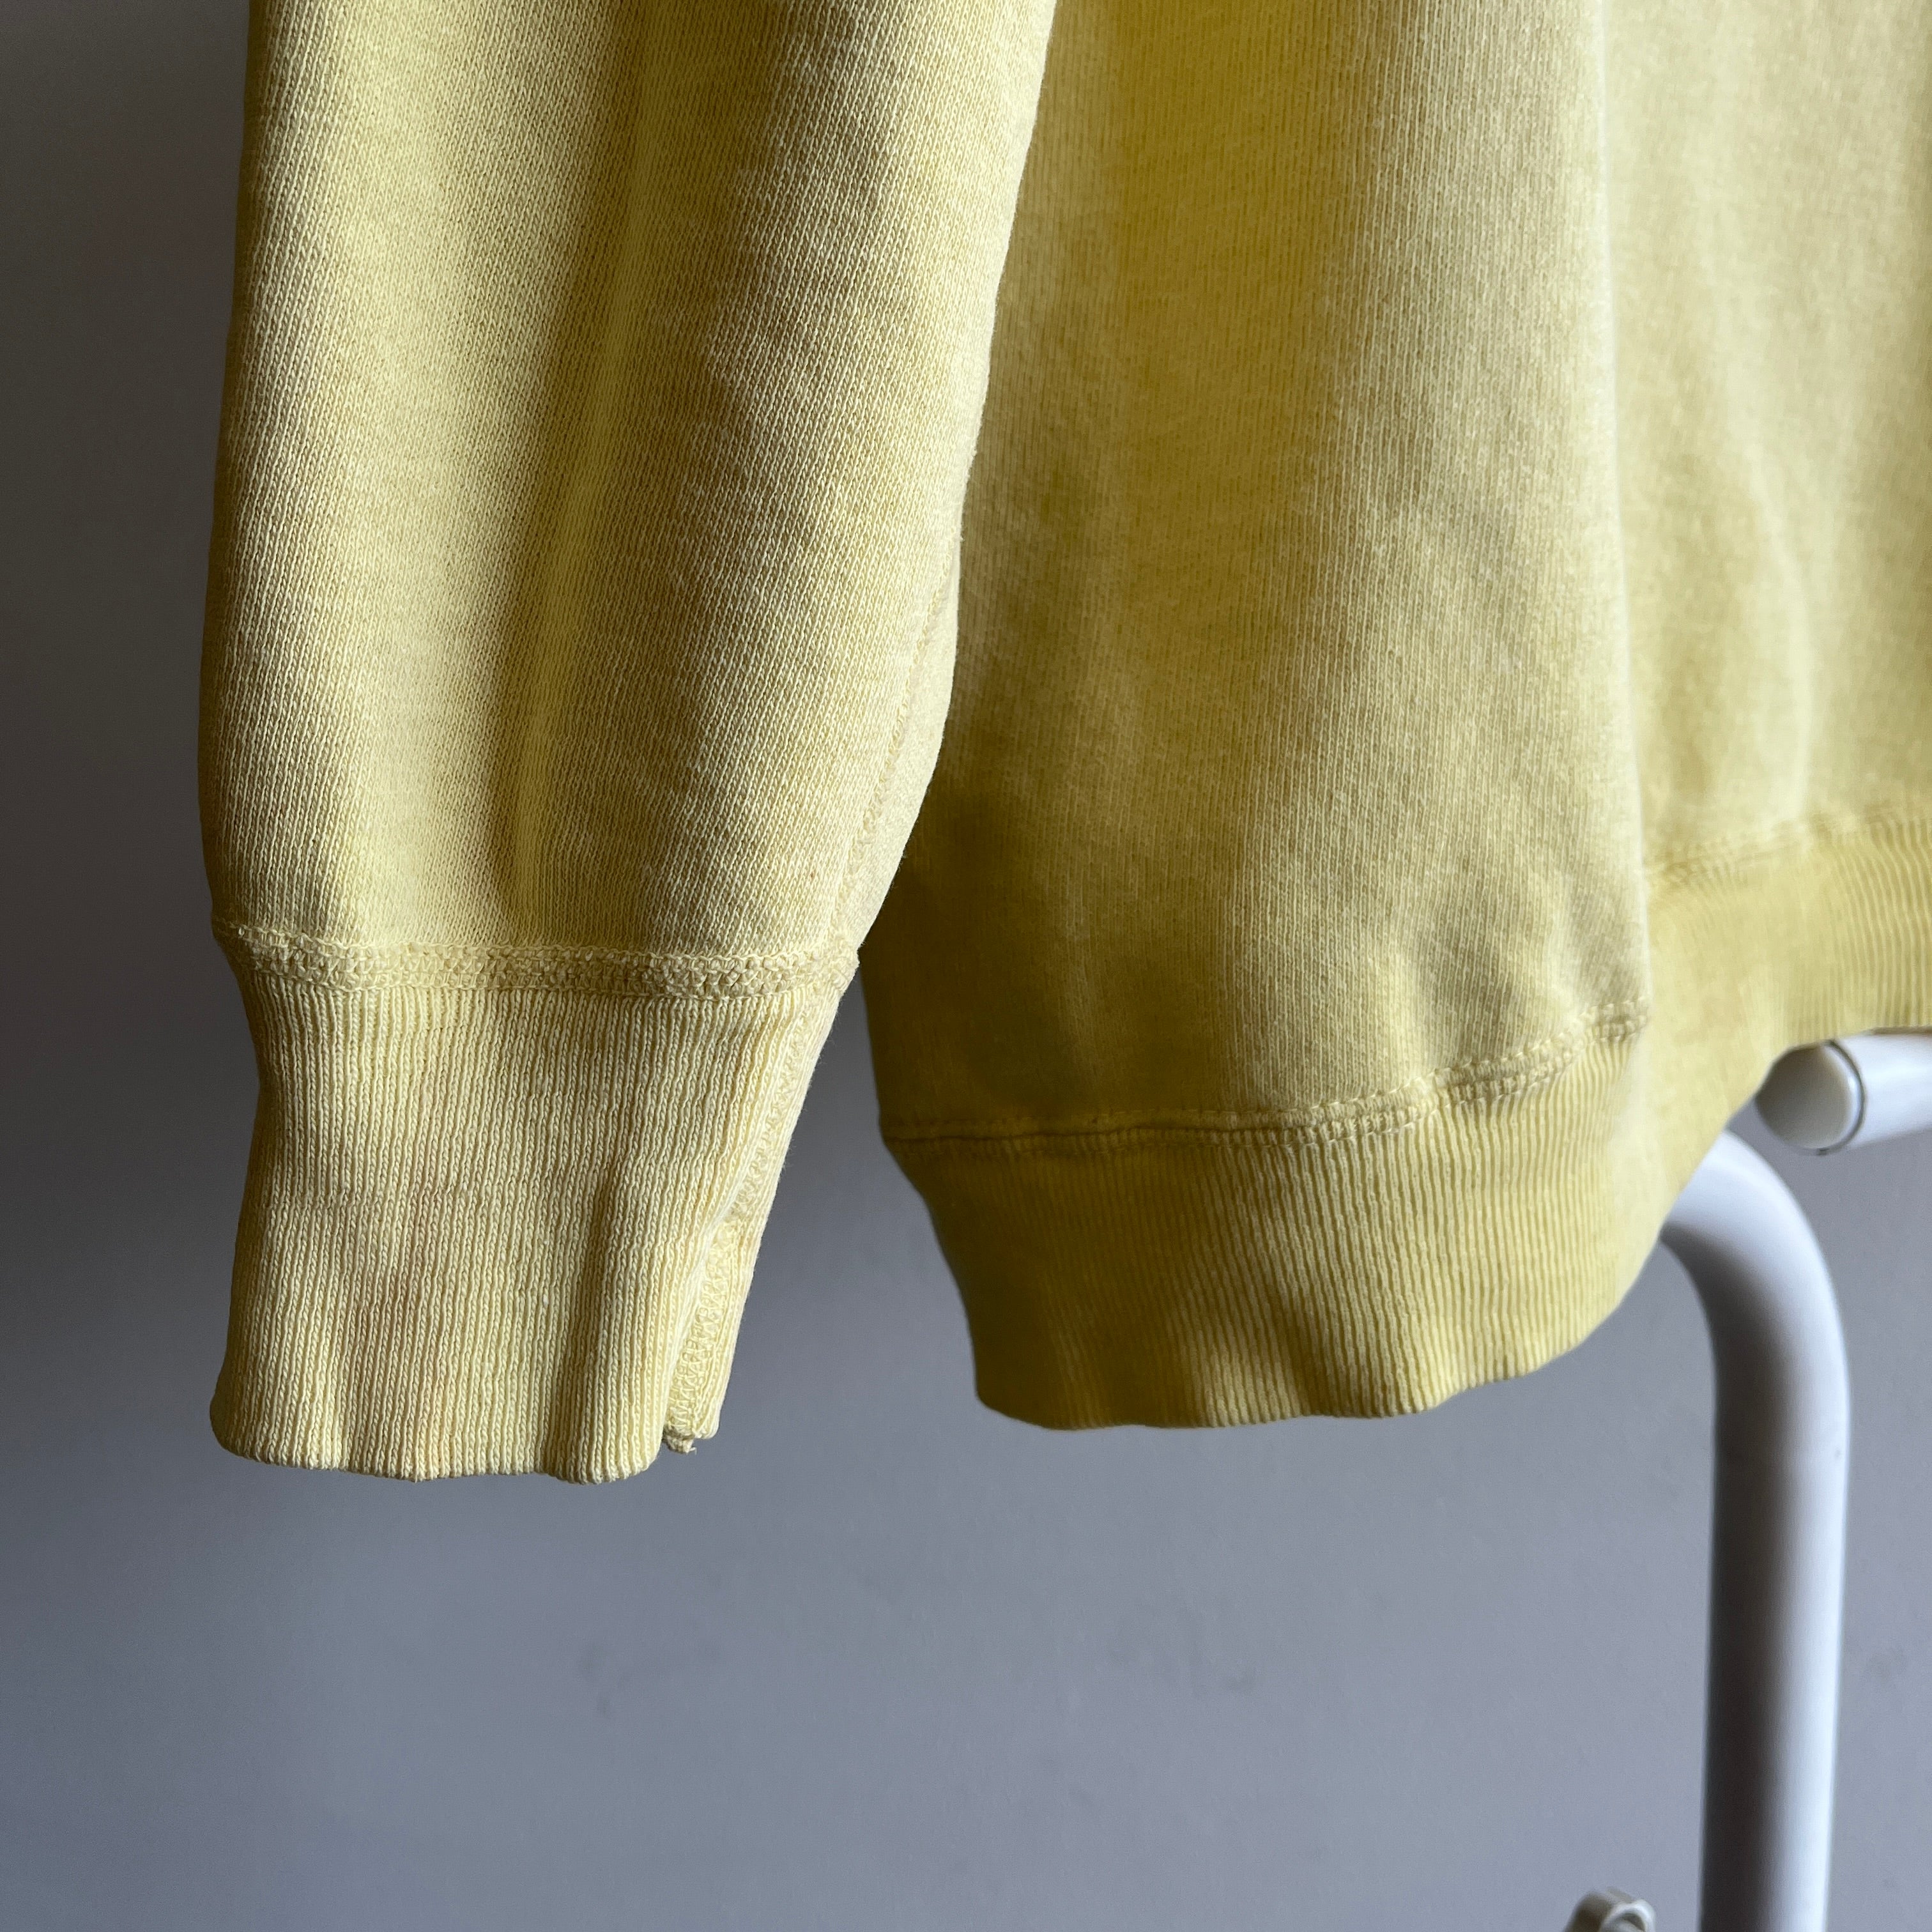 1970s Faded and Stained Yellow Medium Weight Soft Sweatshirt